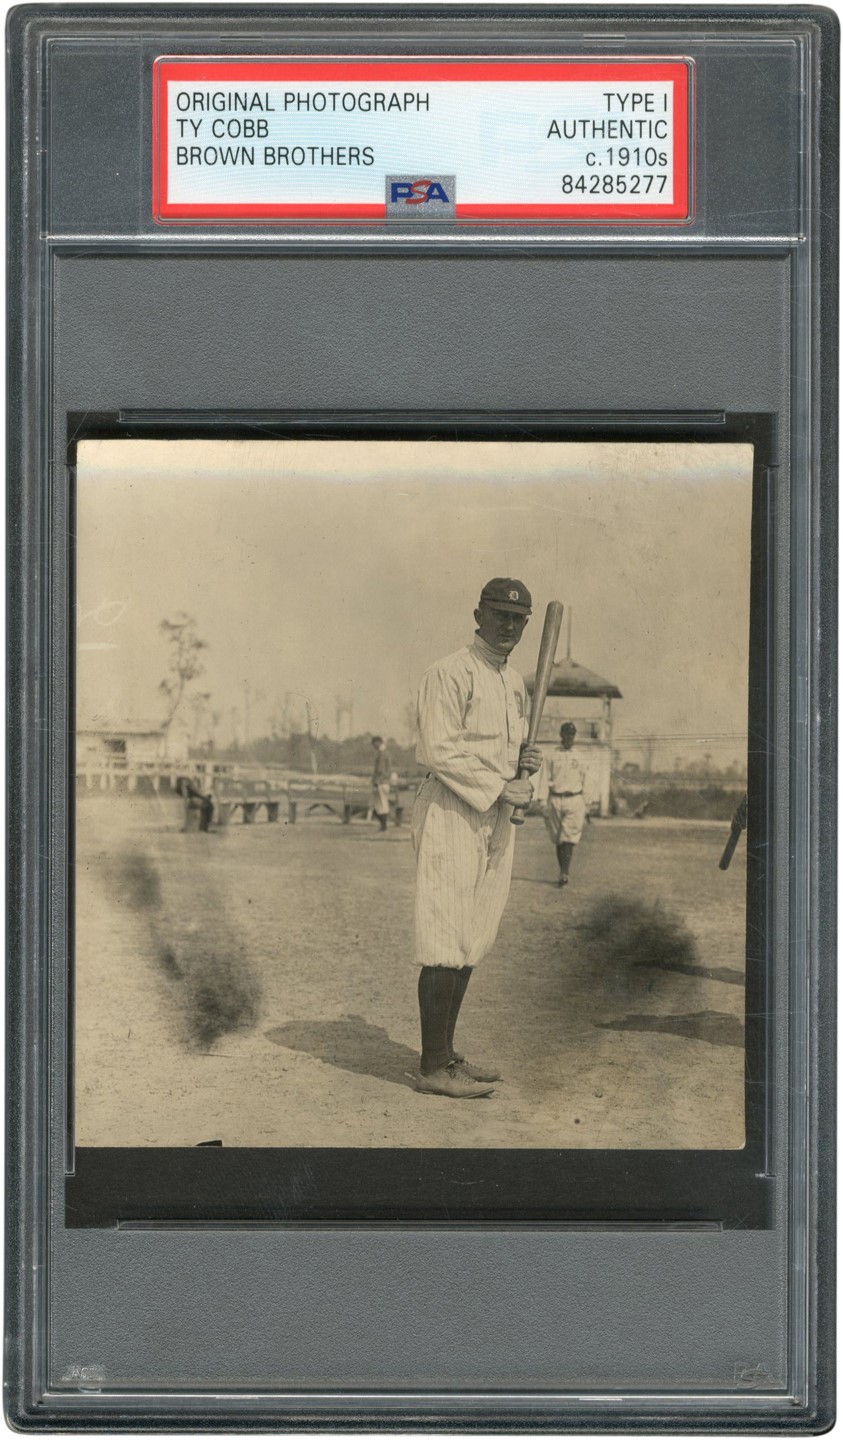 - Ty Cobb Posed with Bat Photograph (PSA Type I)